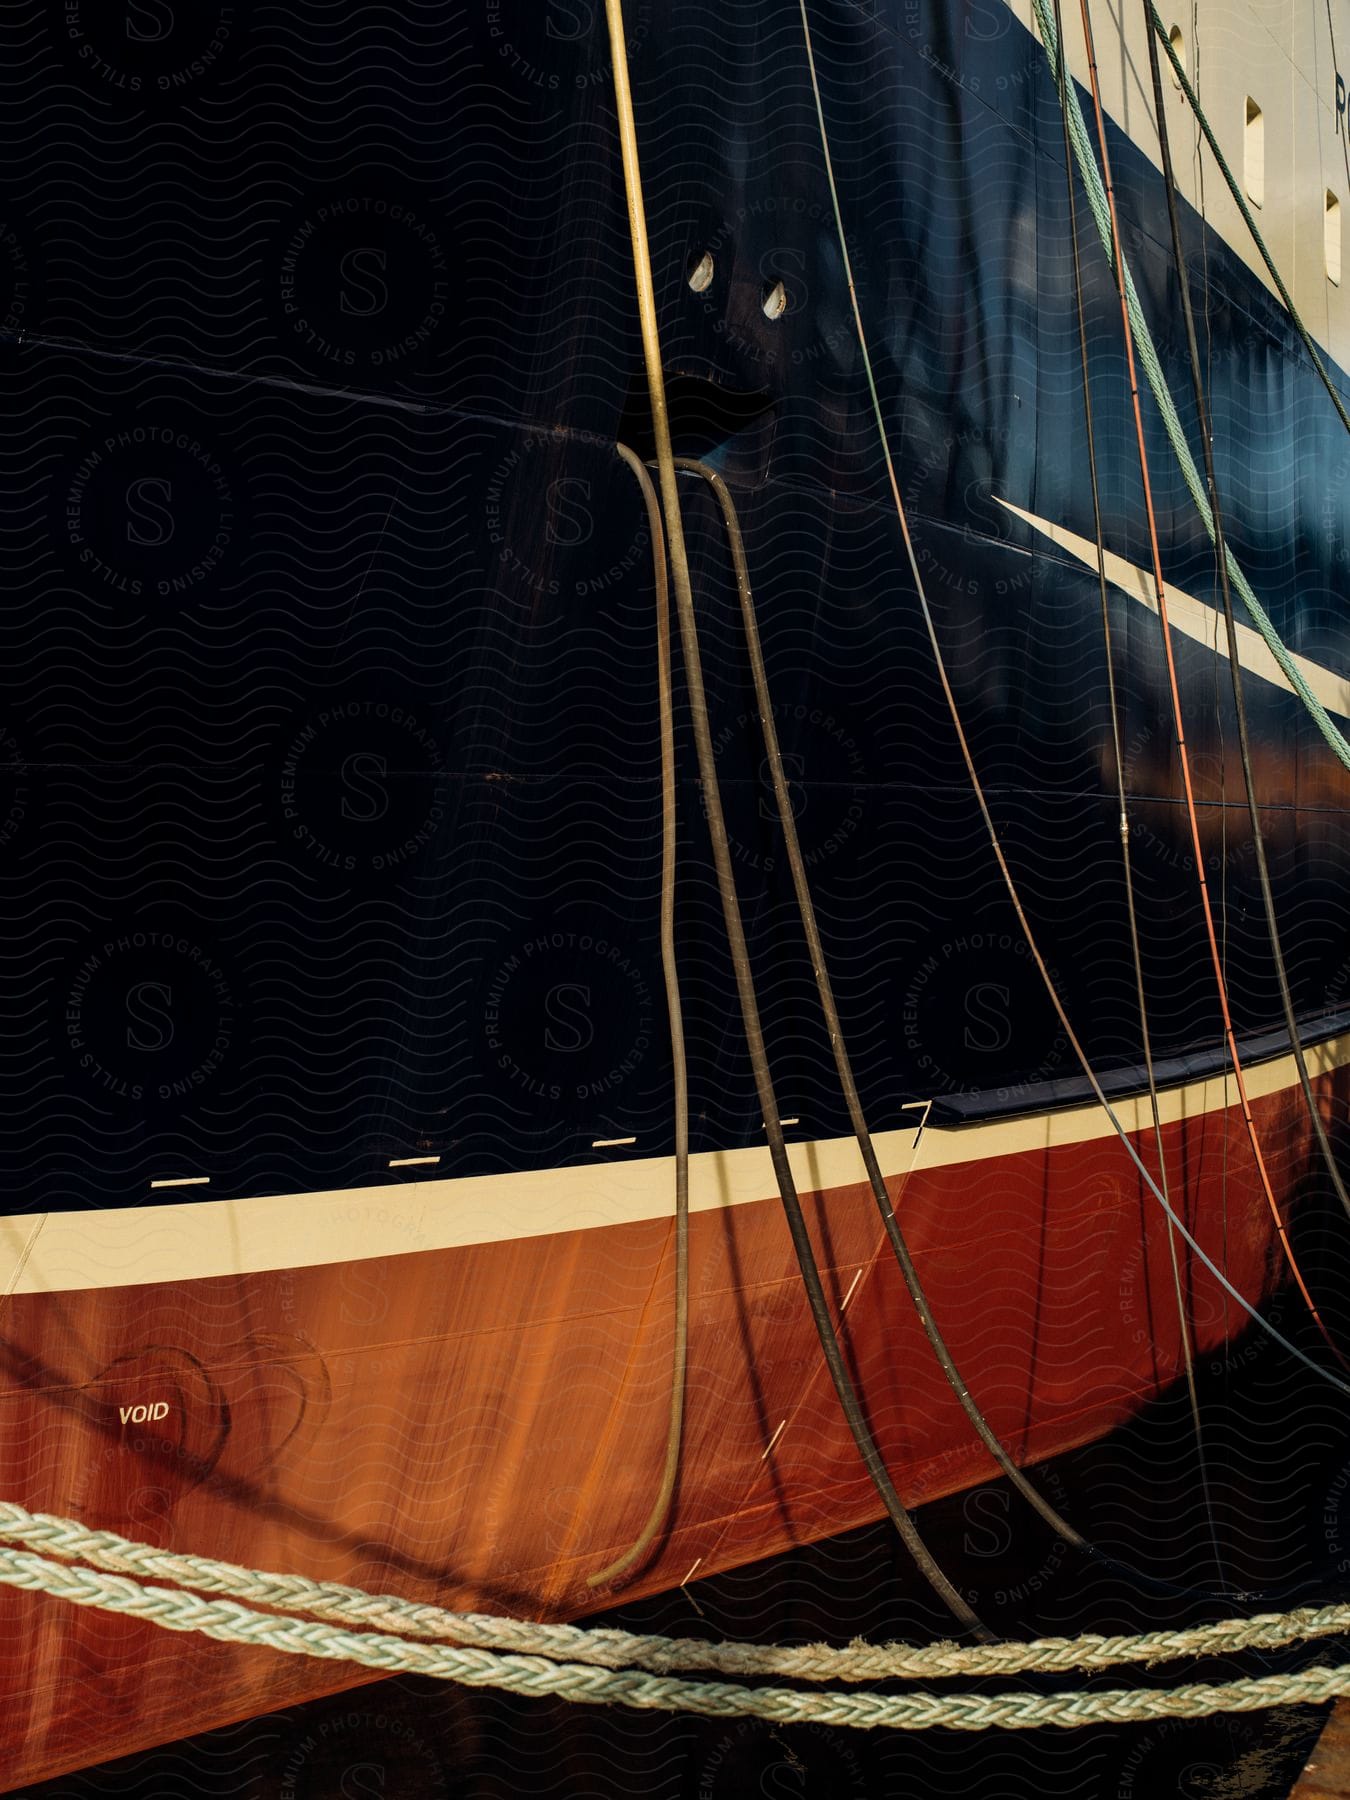 A close up on the side of a large boat with many ropes coming off of it